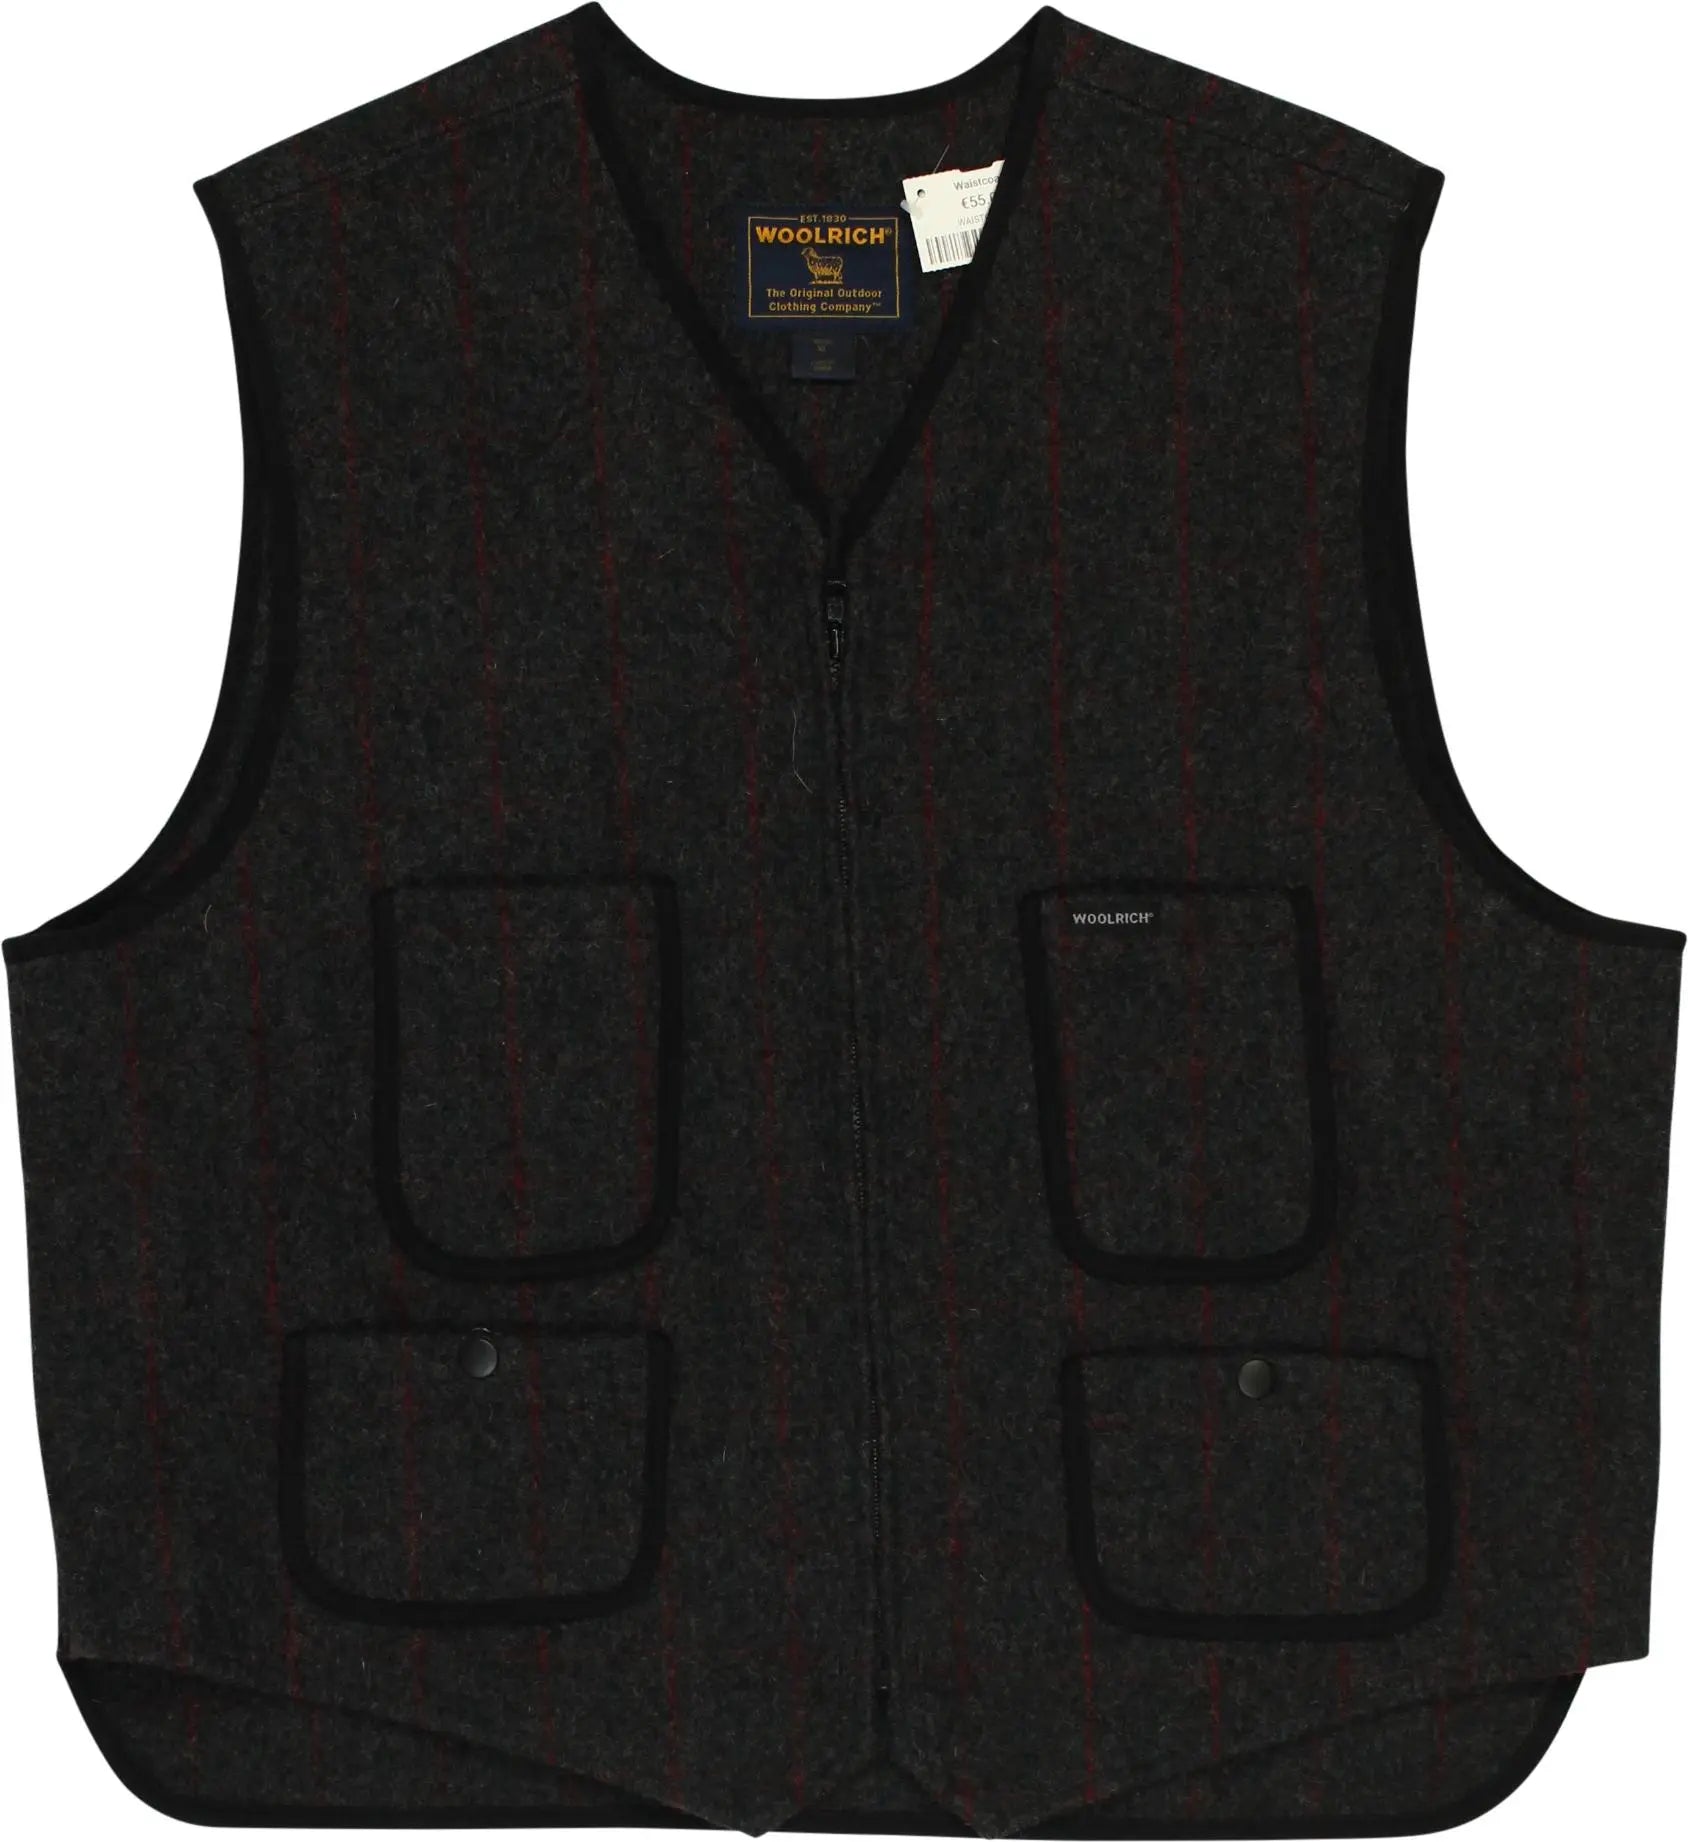 Woolrich - Woolrich Waistcoat- ThriftTale.com - Vintage and second handclothing